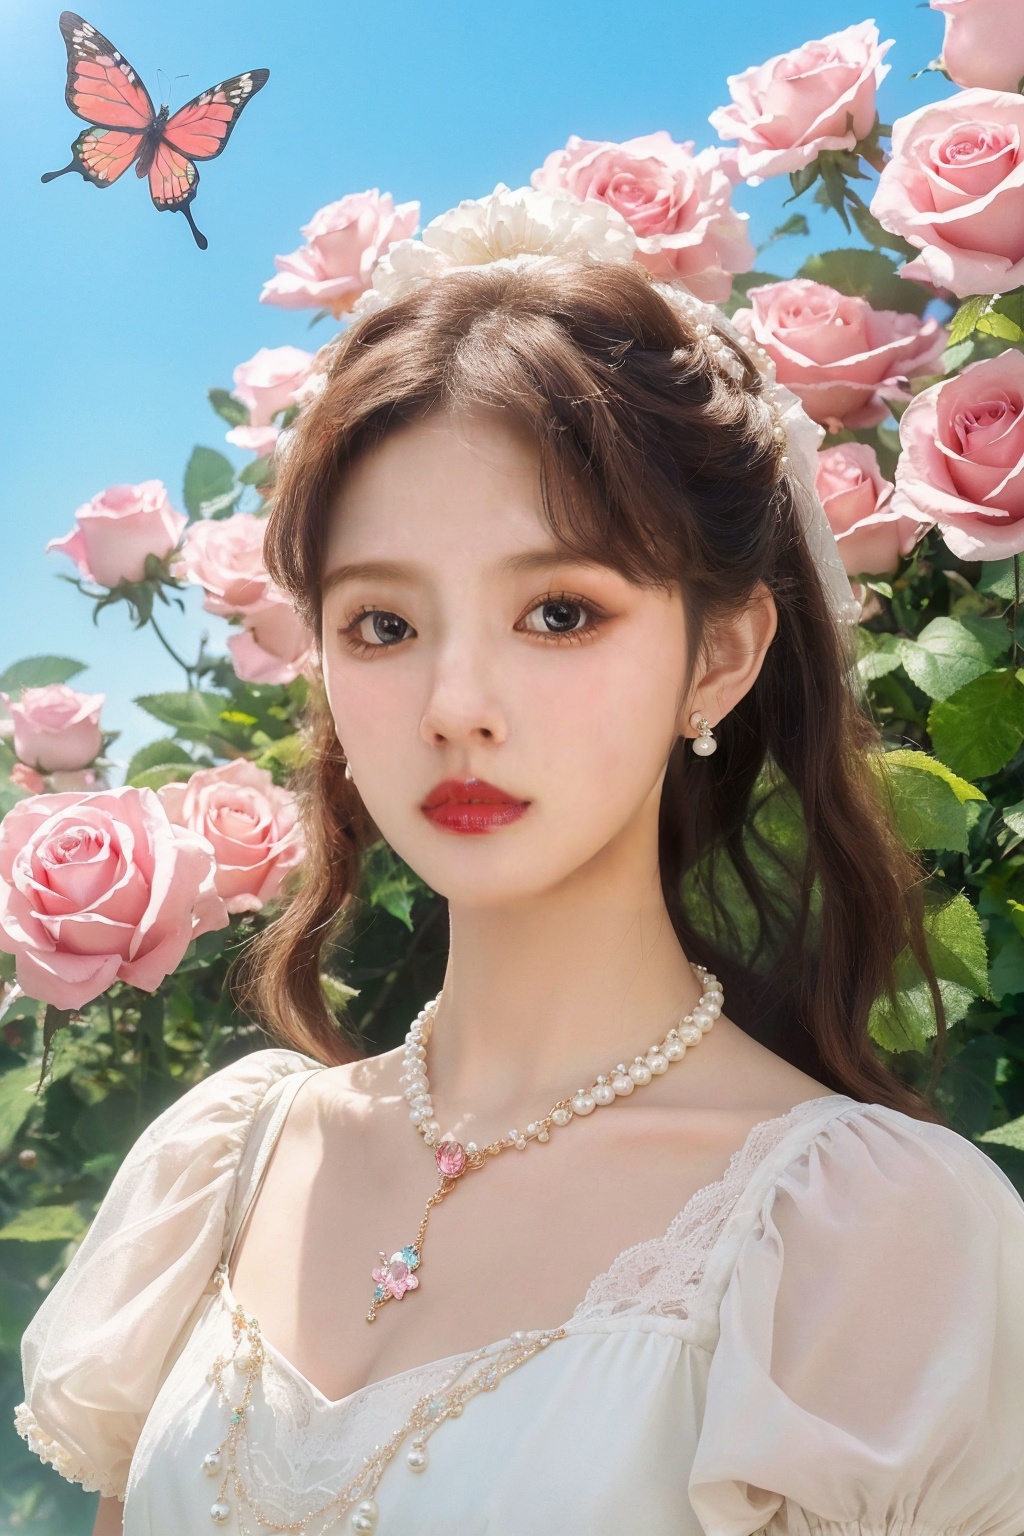 quality,8K,extremely complex details,1girl,lolita,careful eyes,looking_at_viewer,gradient art,rose,upper_body,in the flower cluster,sky,butterfly,<lora:jiBeauty复古V1.0_1 :0.6>,necklace,pearls and jewels,